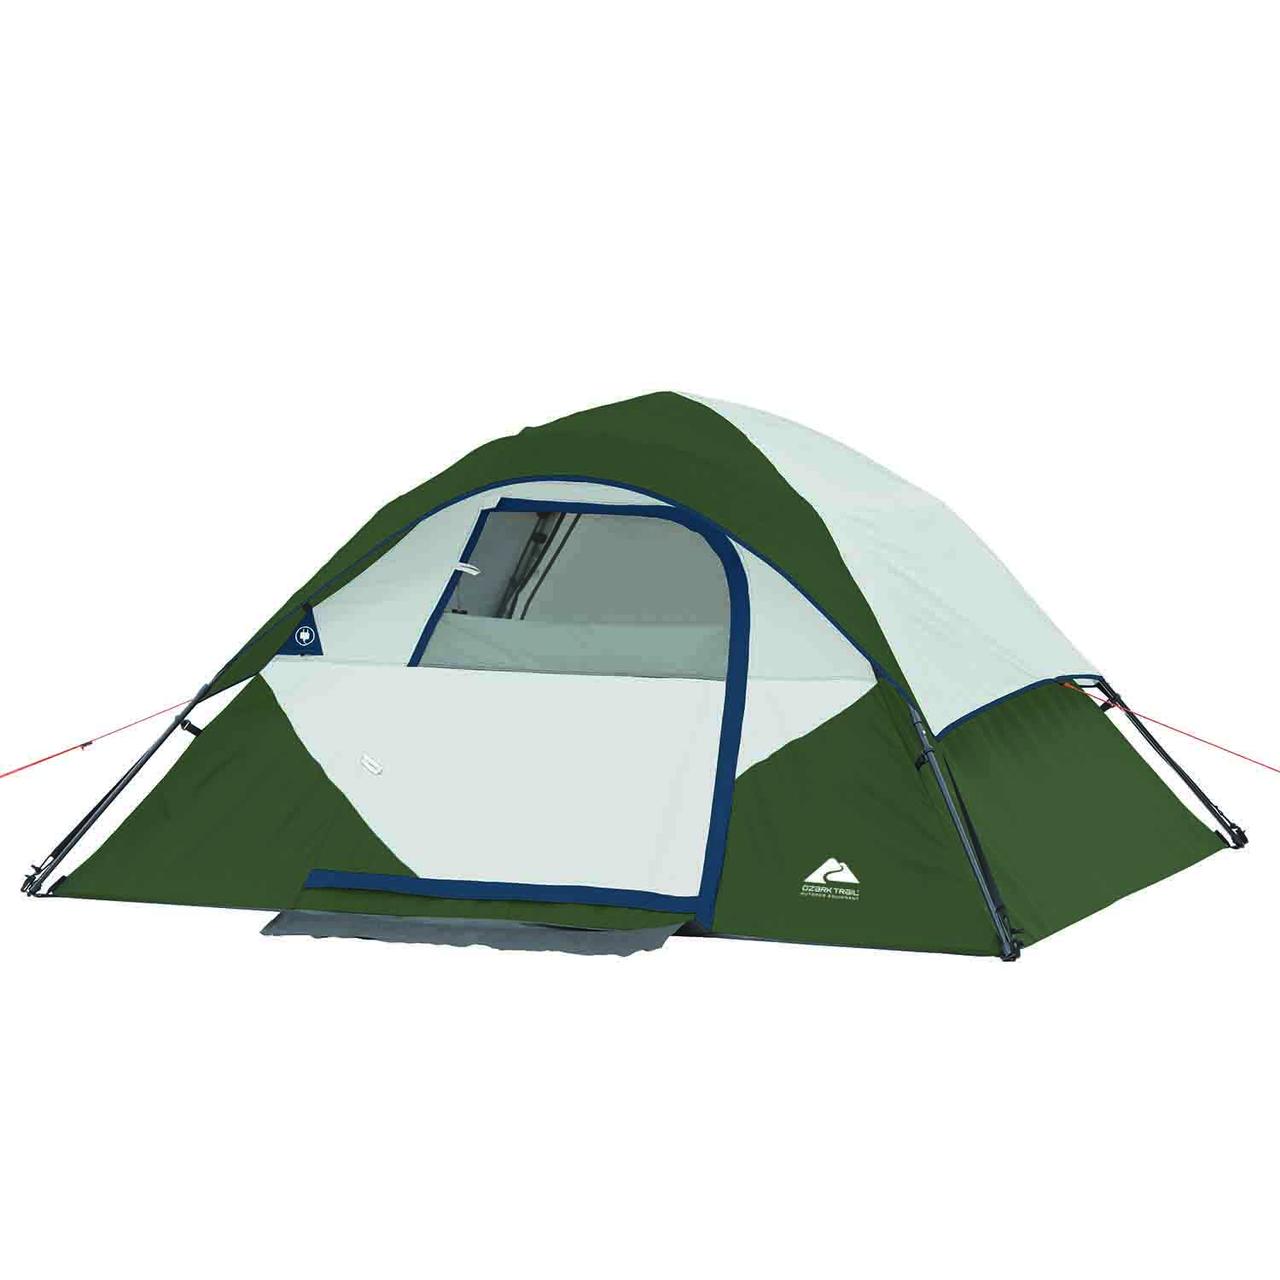 Ozark Trail 6-Piece Camping Combo -Green (Includes tent, chairs, sleeping bags, and table) - image 2 of 8